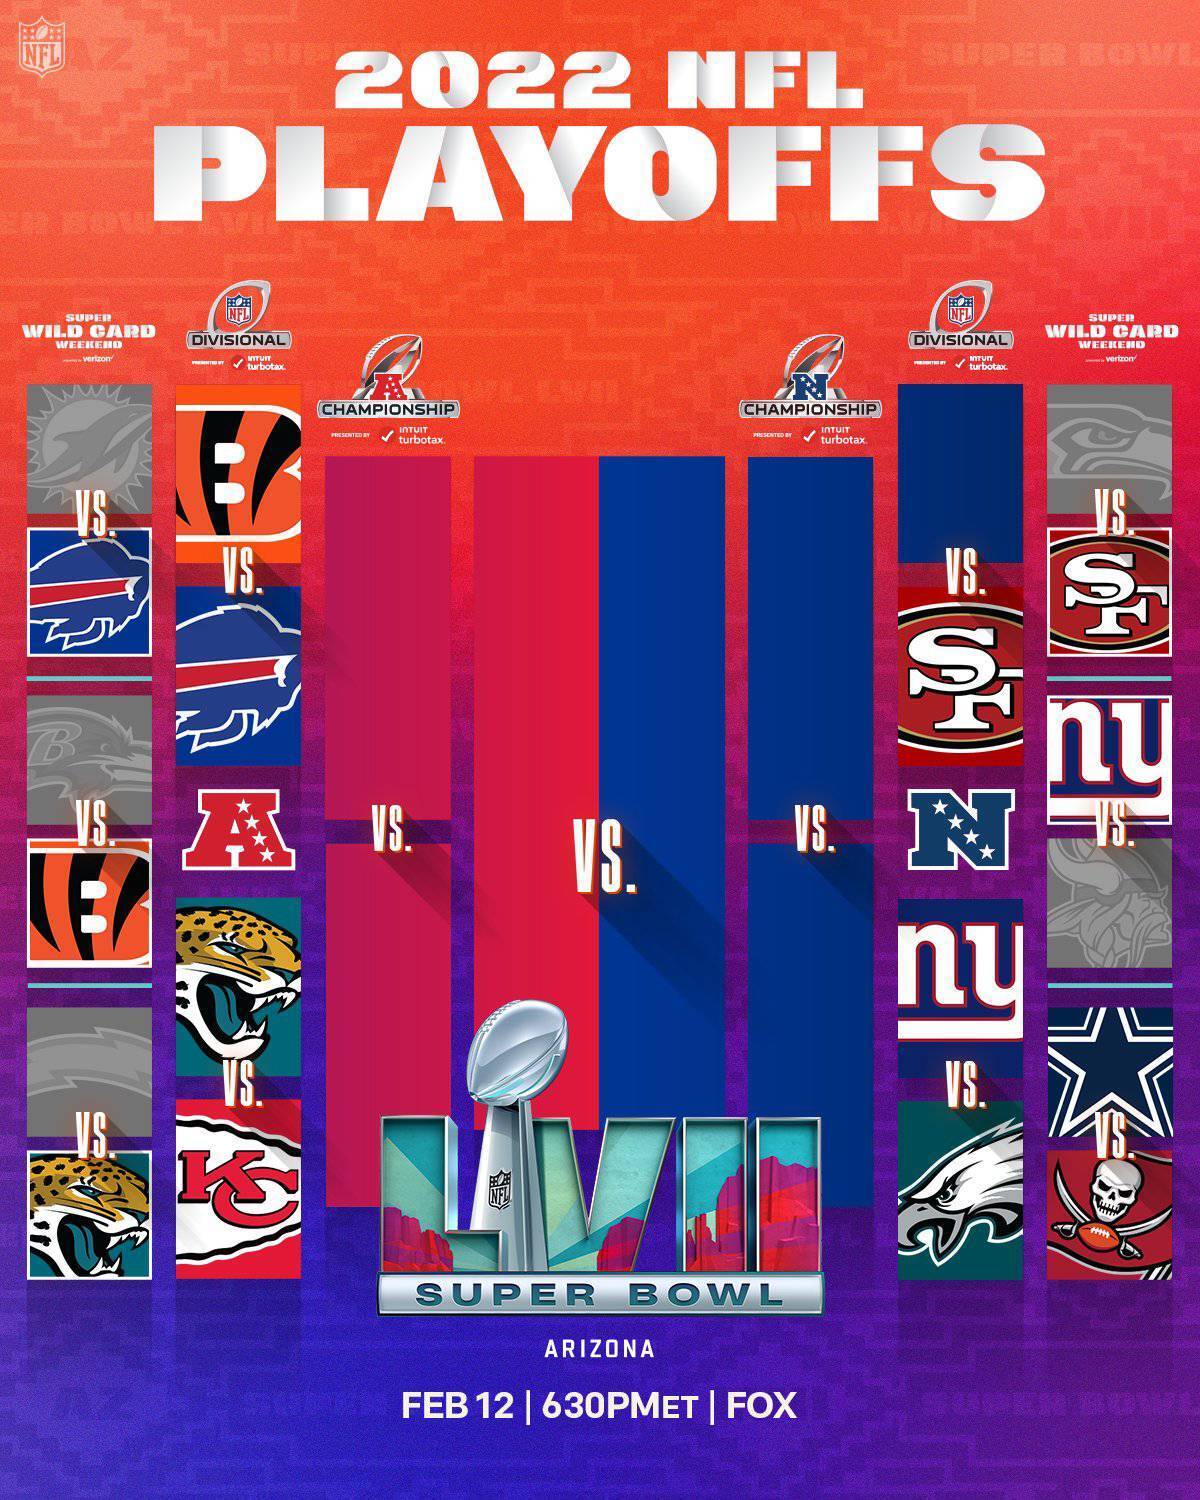 nfl play off picture